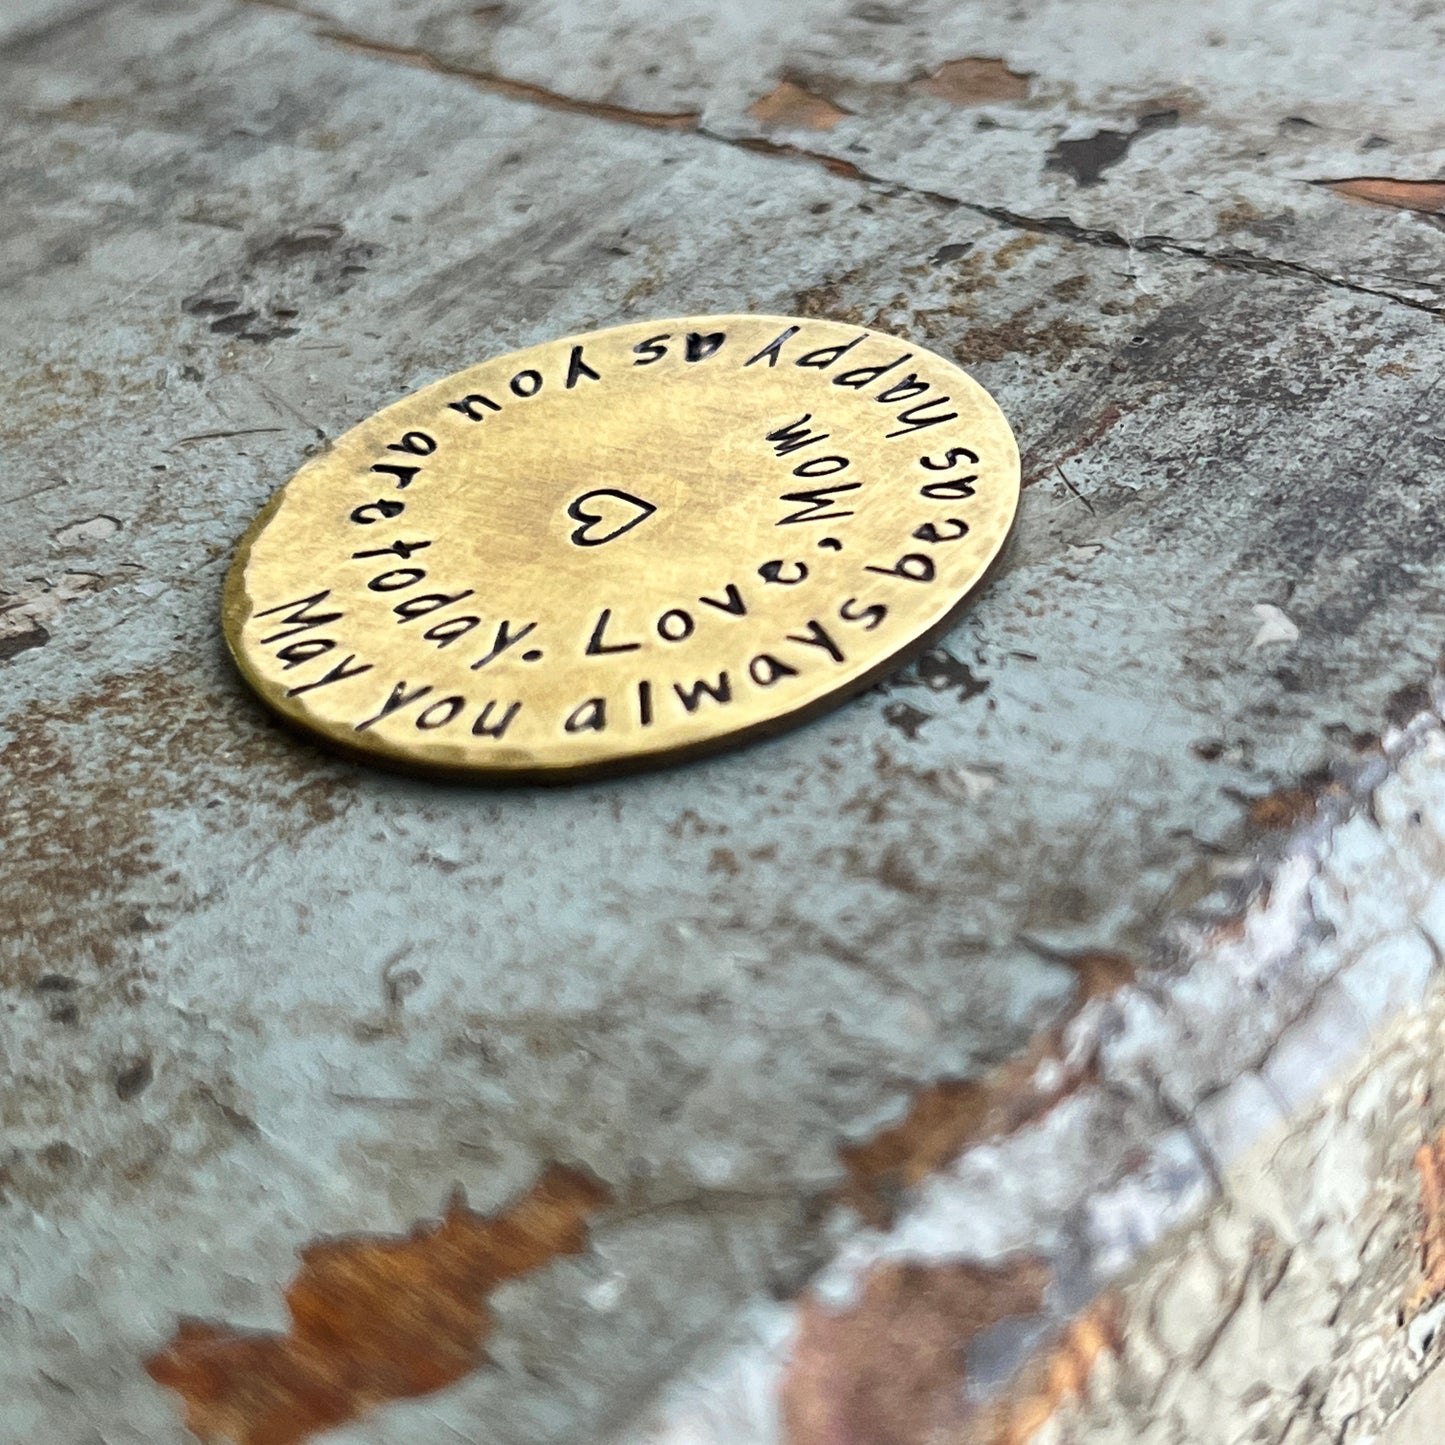 Keepsake Gift from Mom - Brass Coin with Hand Stamped Message